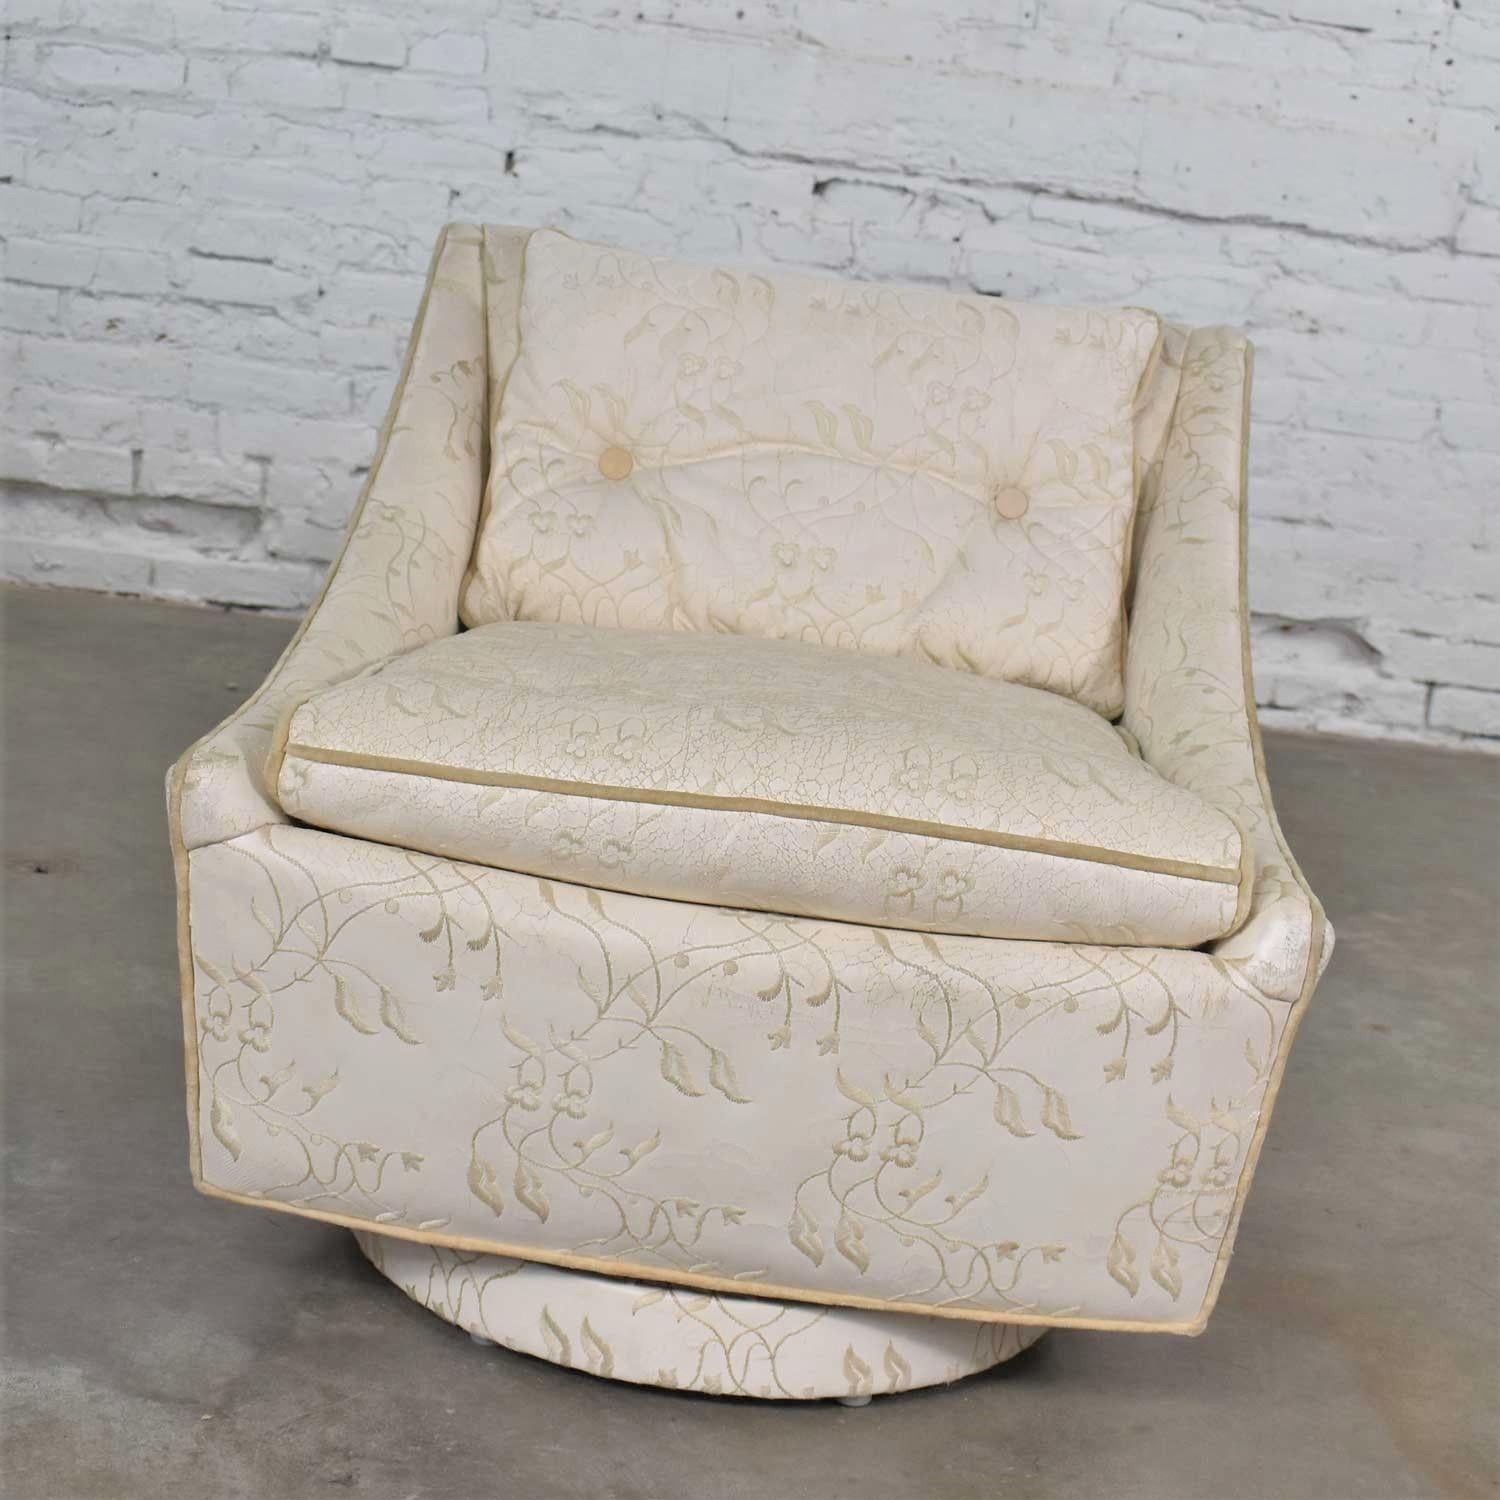 Vintage Art Deco Petite White Swivel Chair Embroidered Leather by Oxford Ltd. In Good Condition For Sale In Topeka, KS